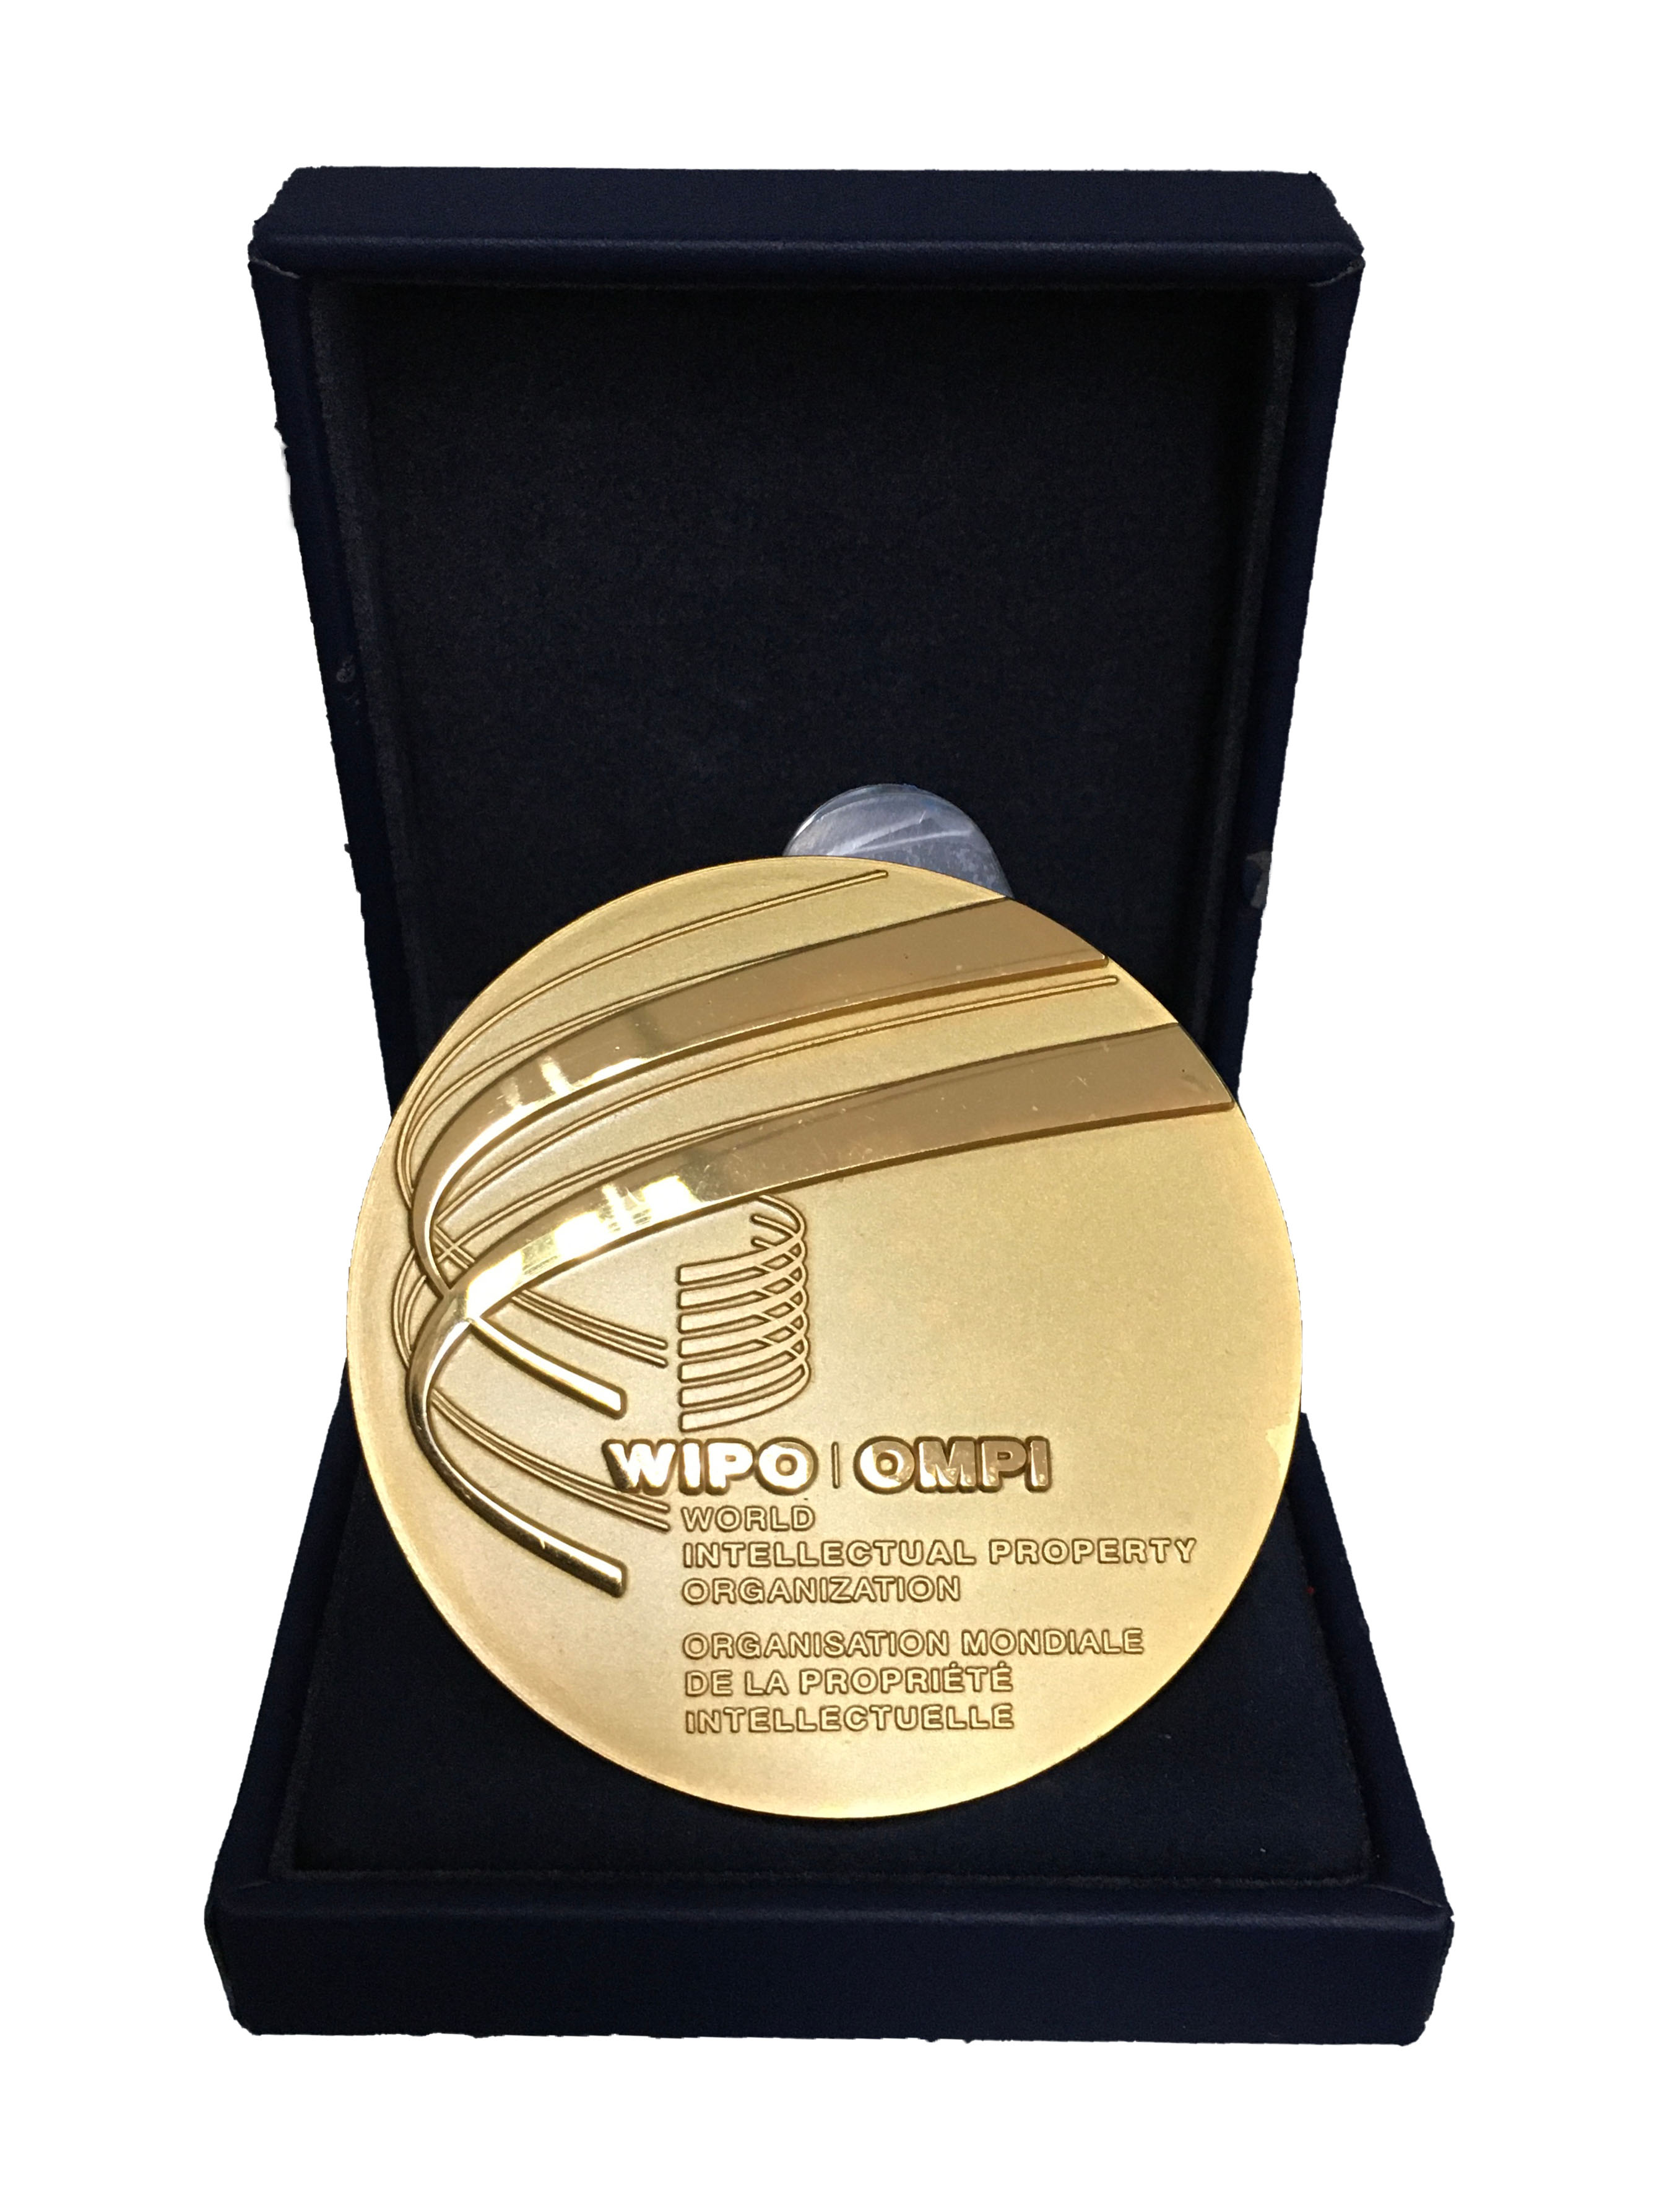 Gold medalist intellectual property award